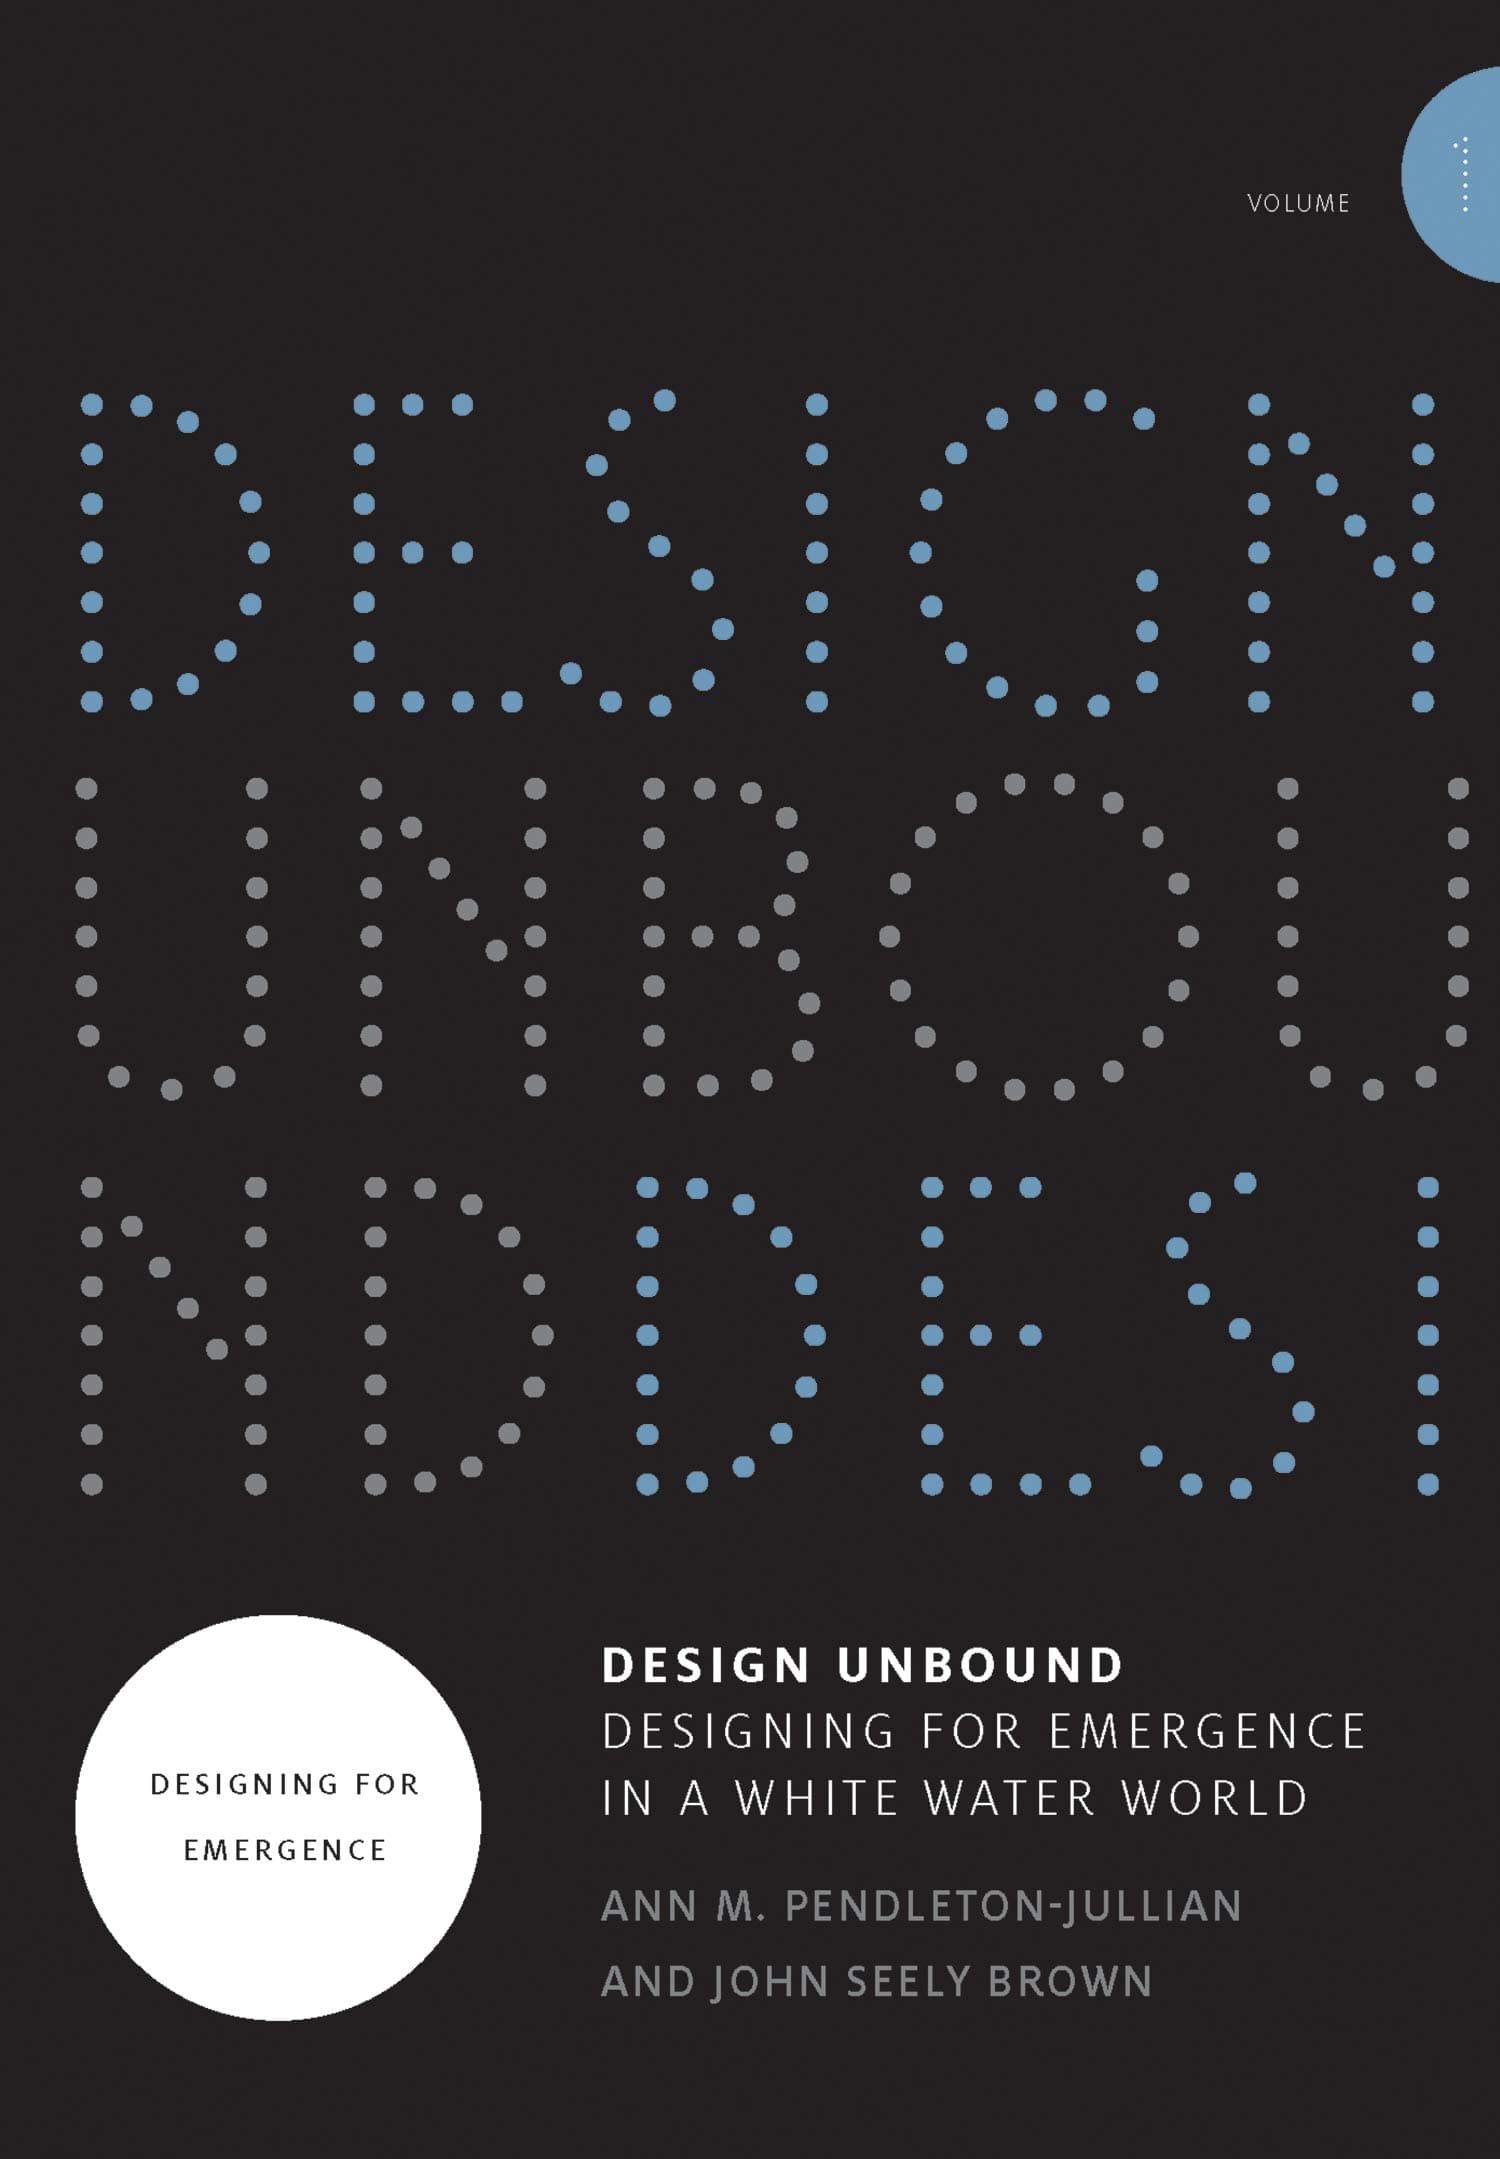 The cover of Design Unbound